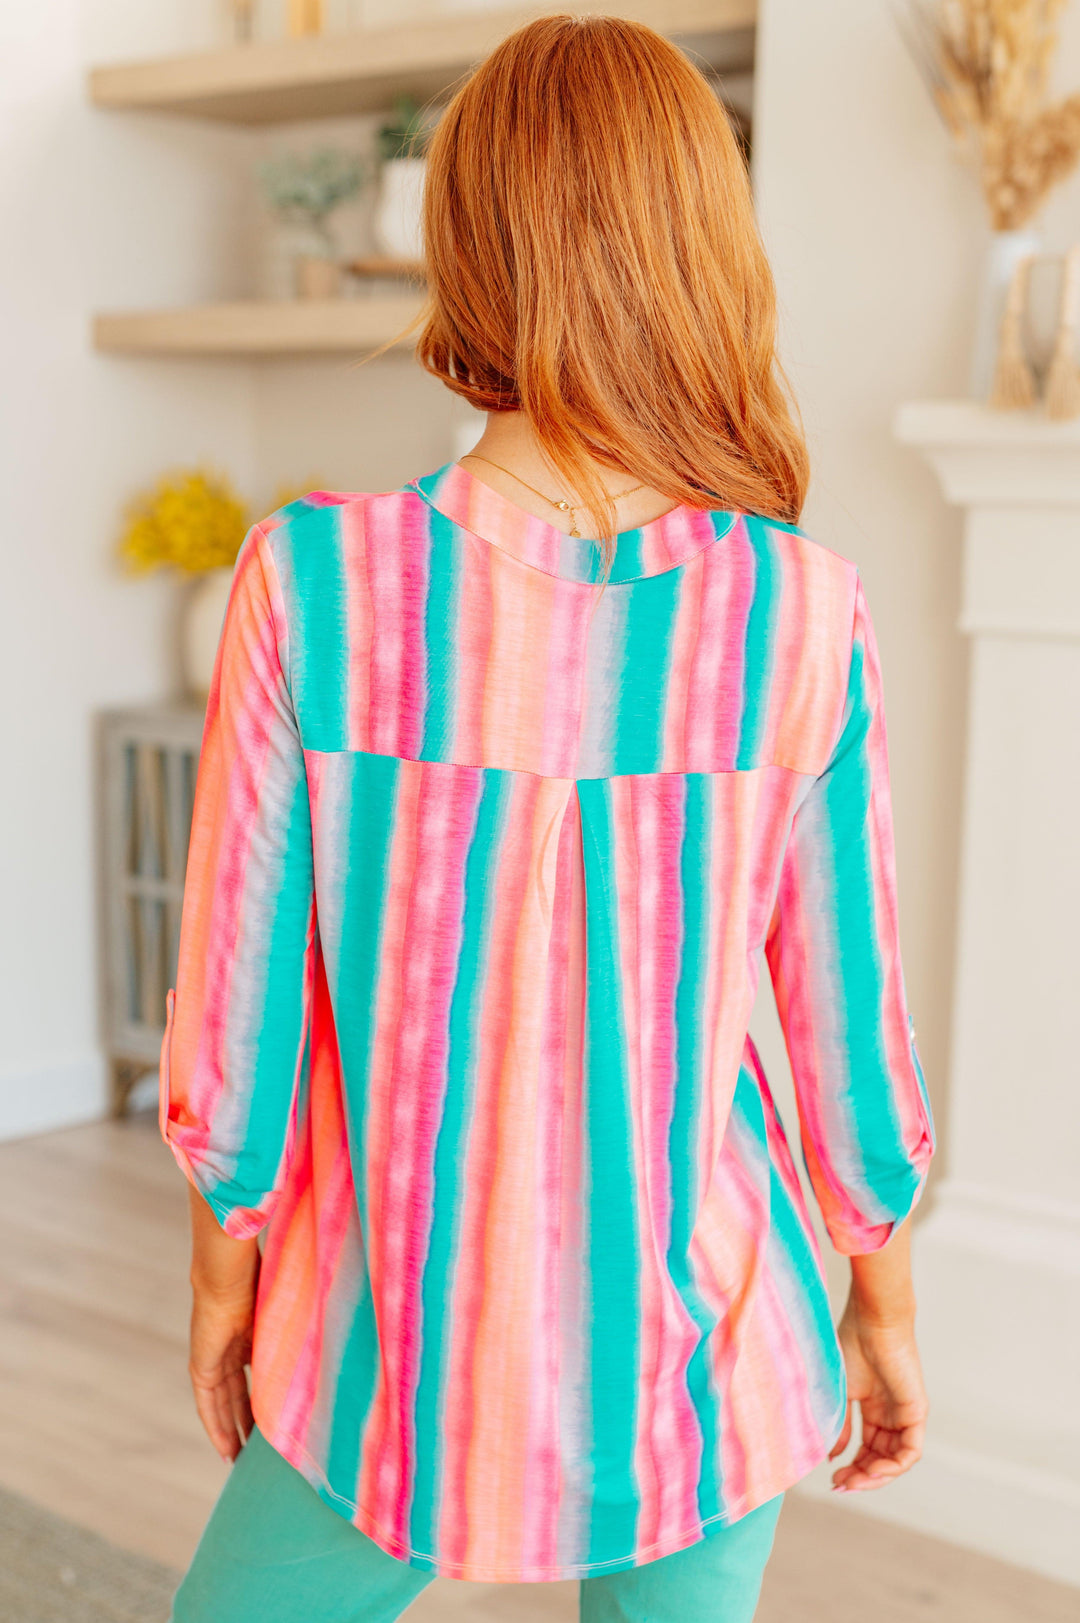 Striped Ombre Top Shirts & Tops